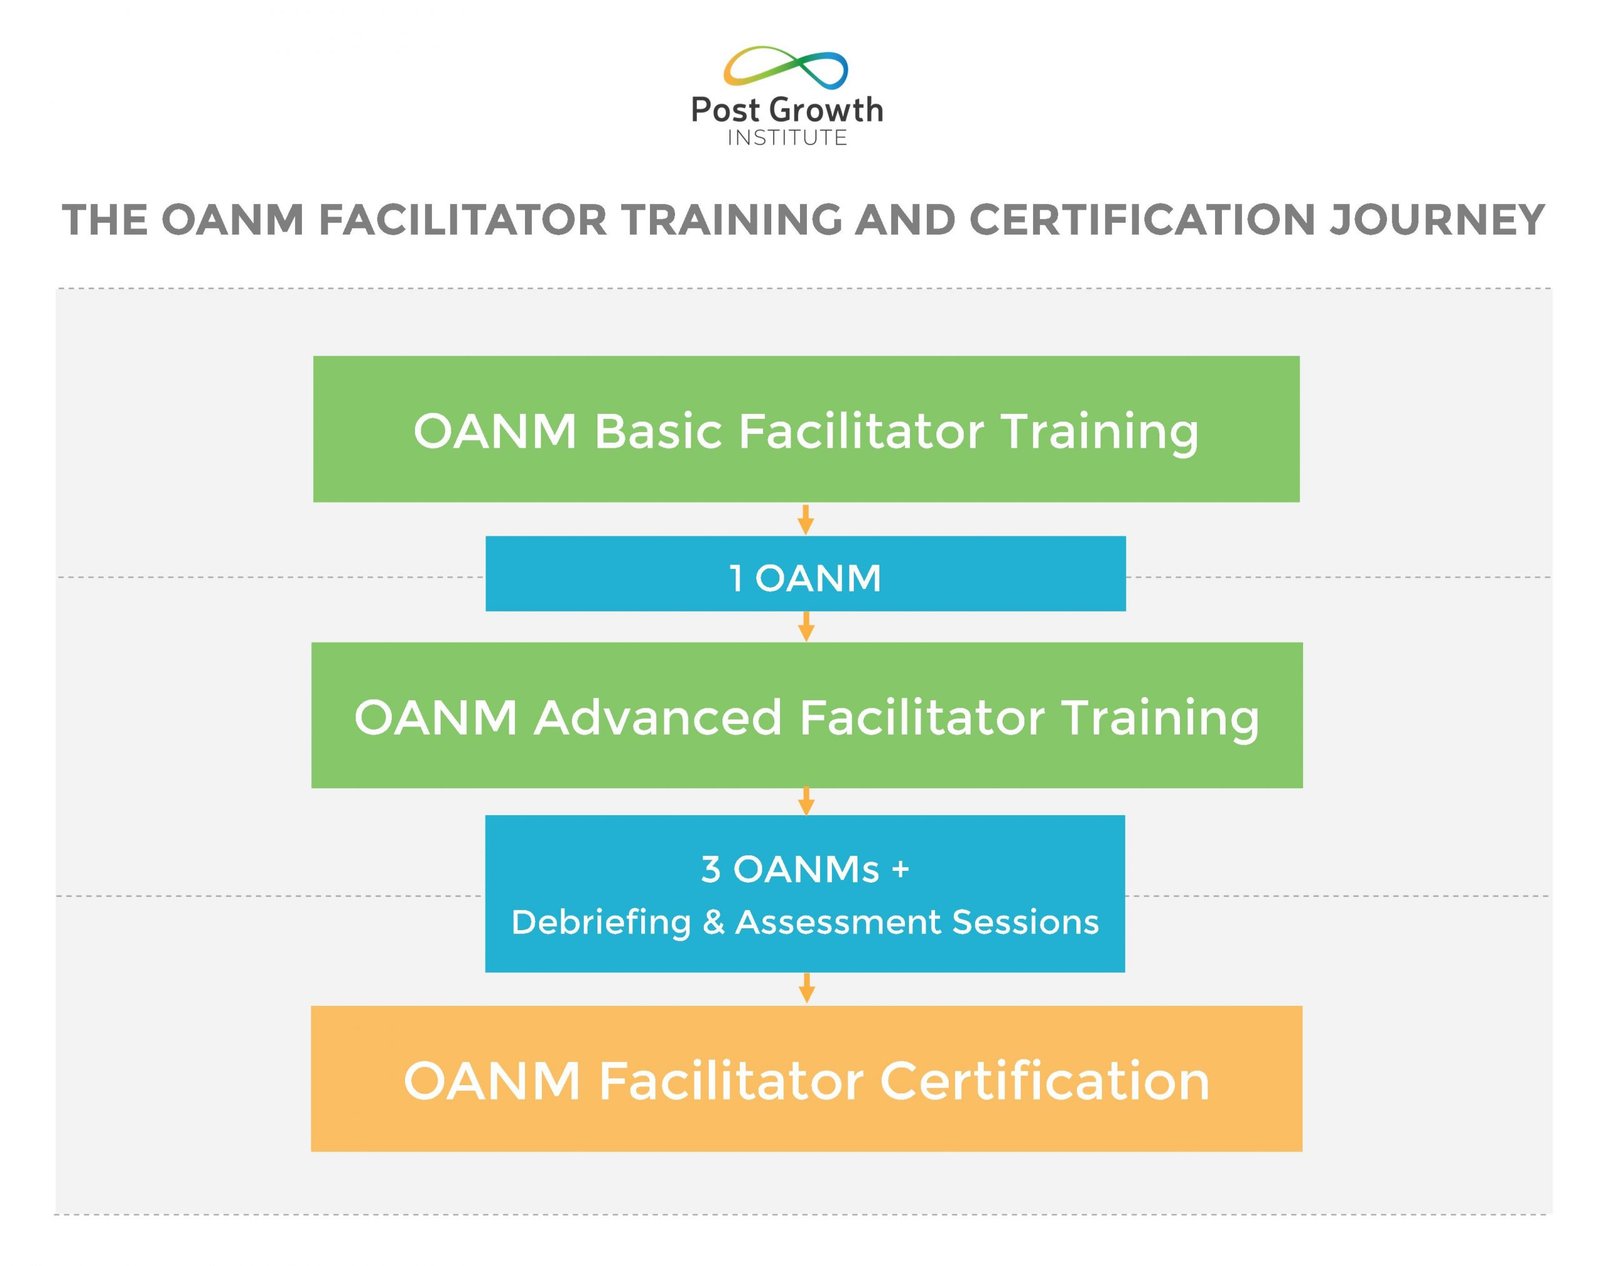 FREE Info Session for Certification: Become a Resilience Toolkit  Facilitator